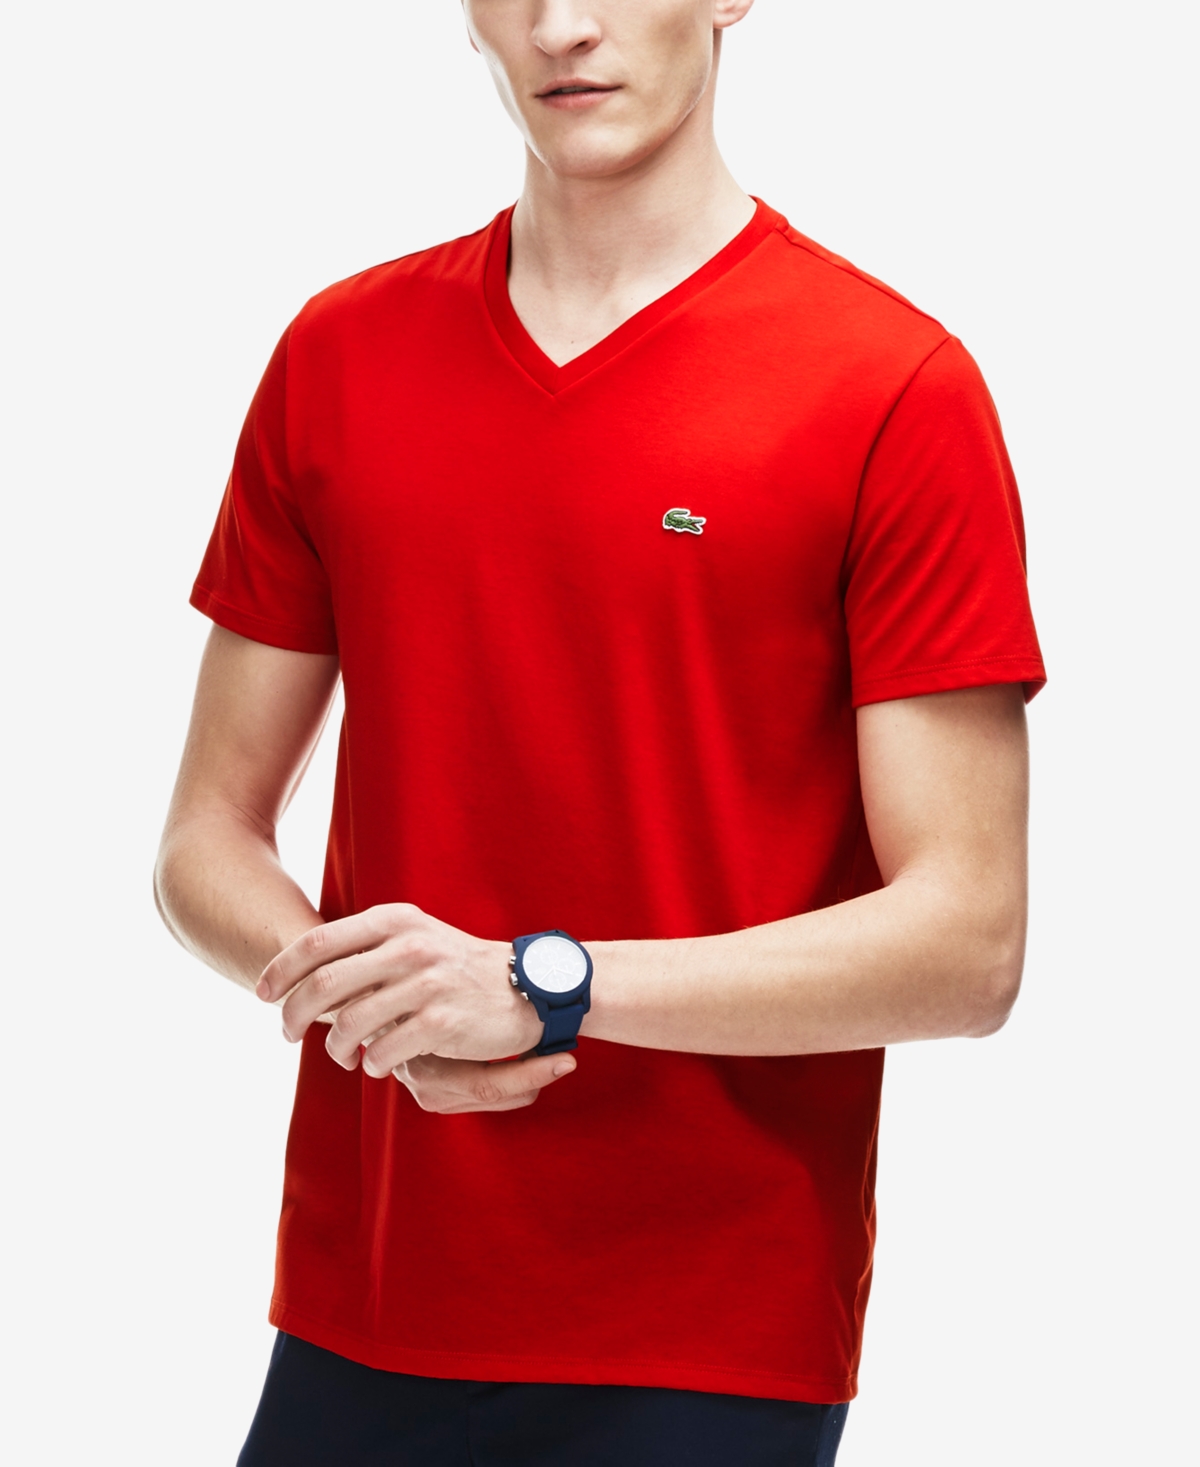 Lacoste Men's  Classic V-neck Soft Pima Cotton Tee Shirt In Red